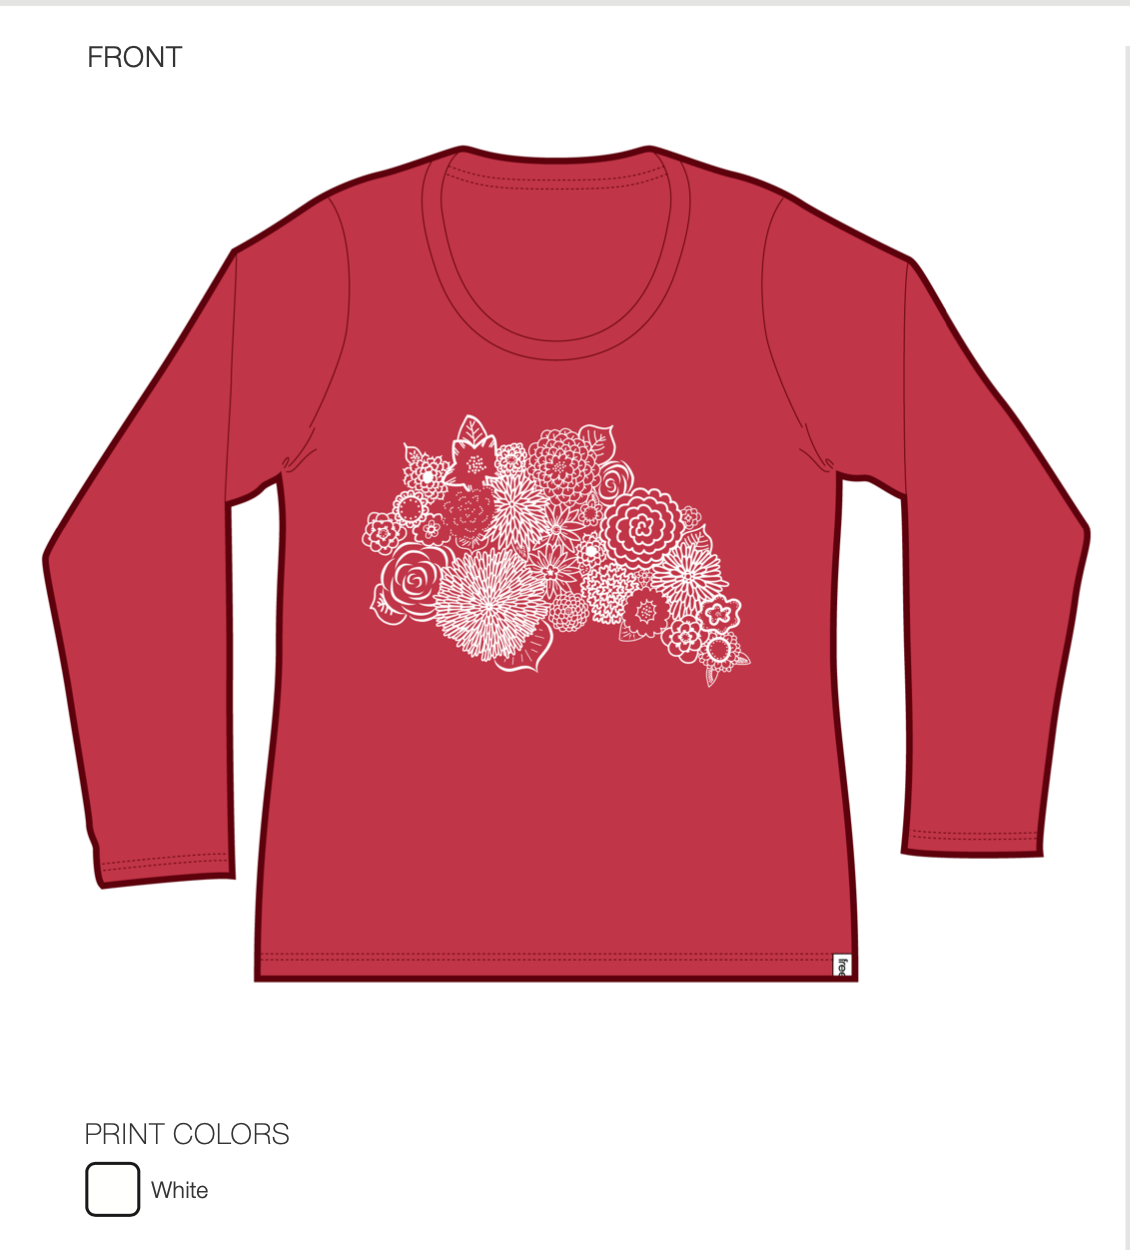 Bloom Tshirt Long Sleeve in Red - Kindred Apparel